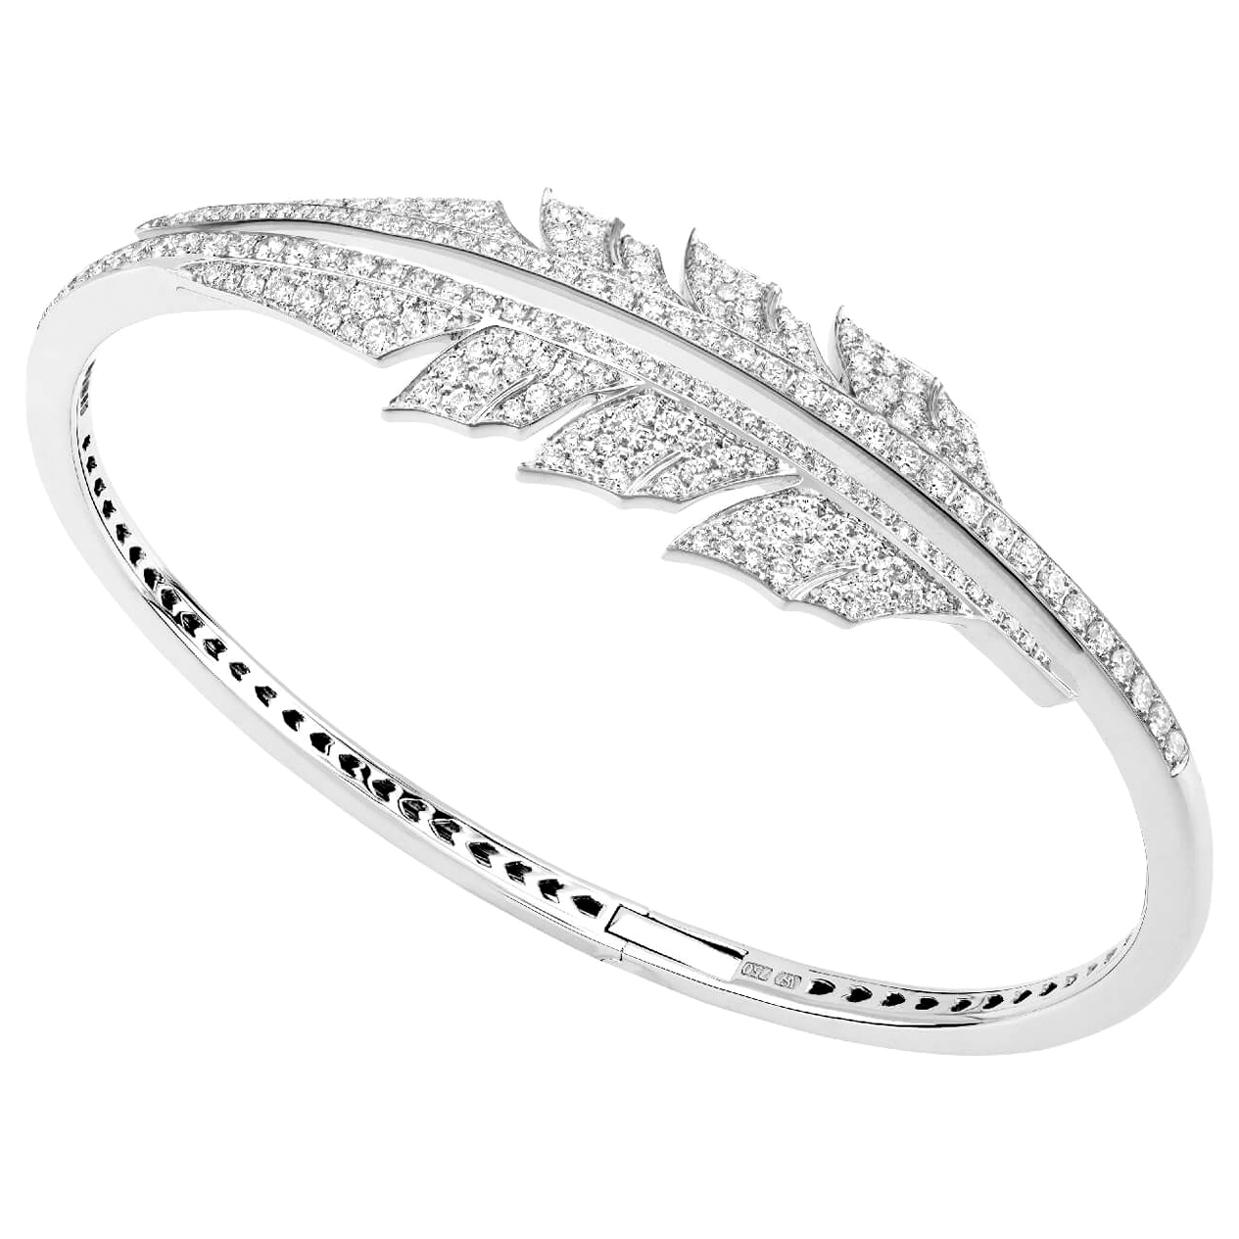 Stephen Webster Magnipheasant Pavé Open Feather 18K Gold and Diamond Bracelet